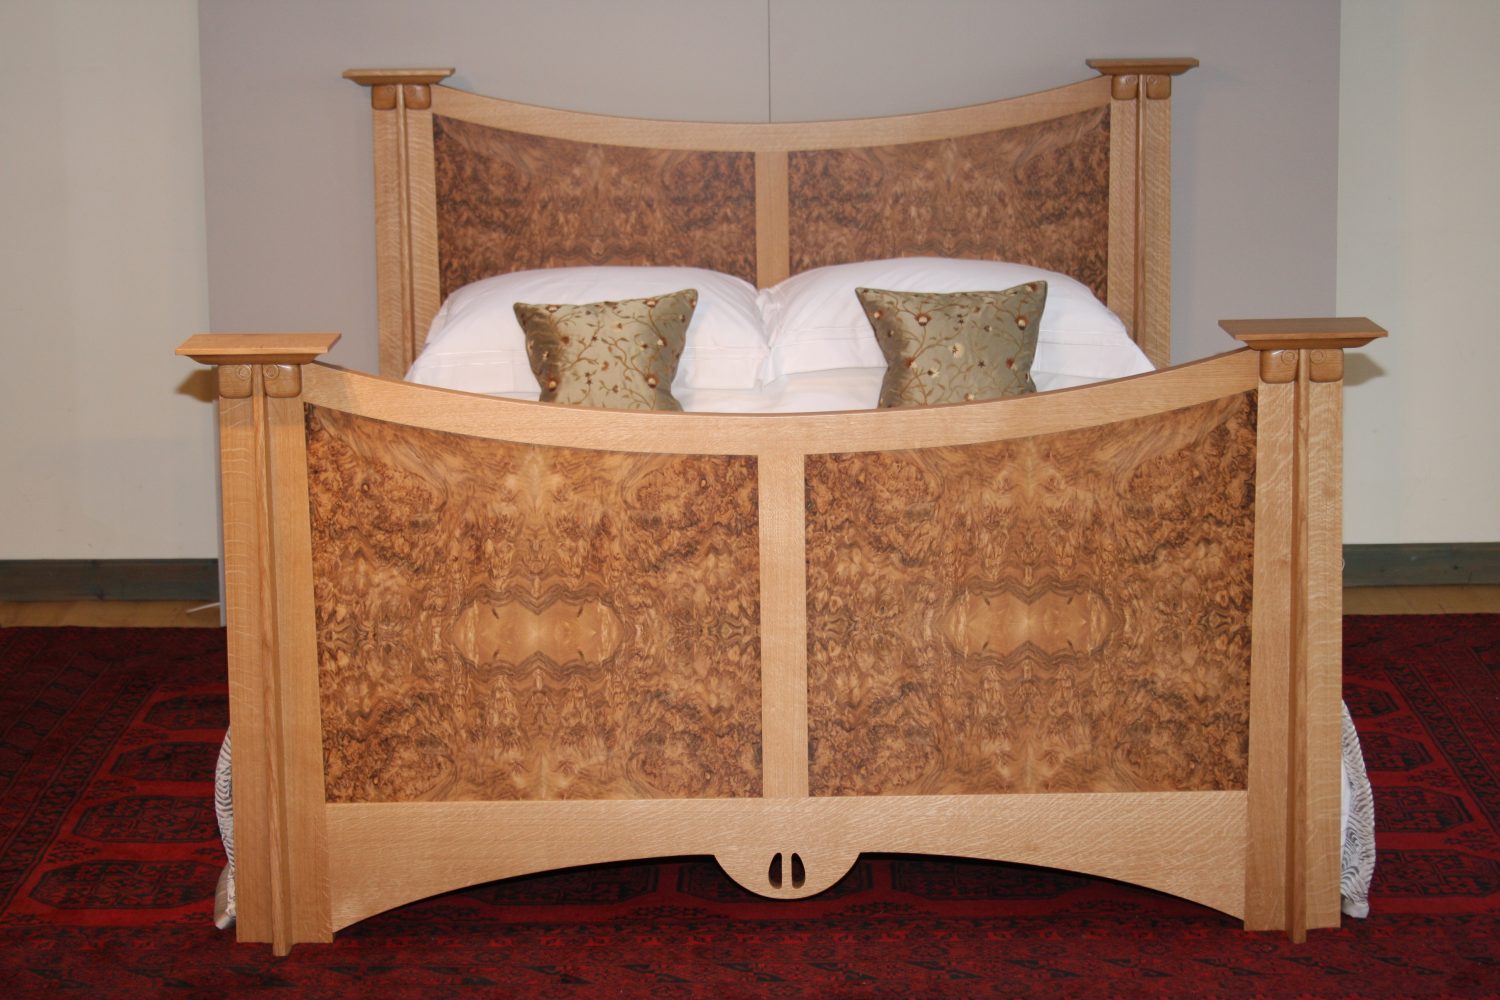 Arts & Crafts Bed in Oak with Burr Walnut Panels